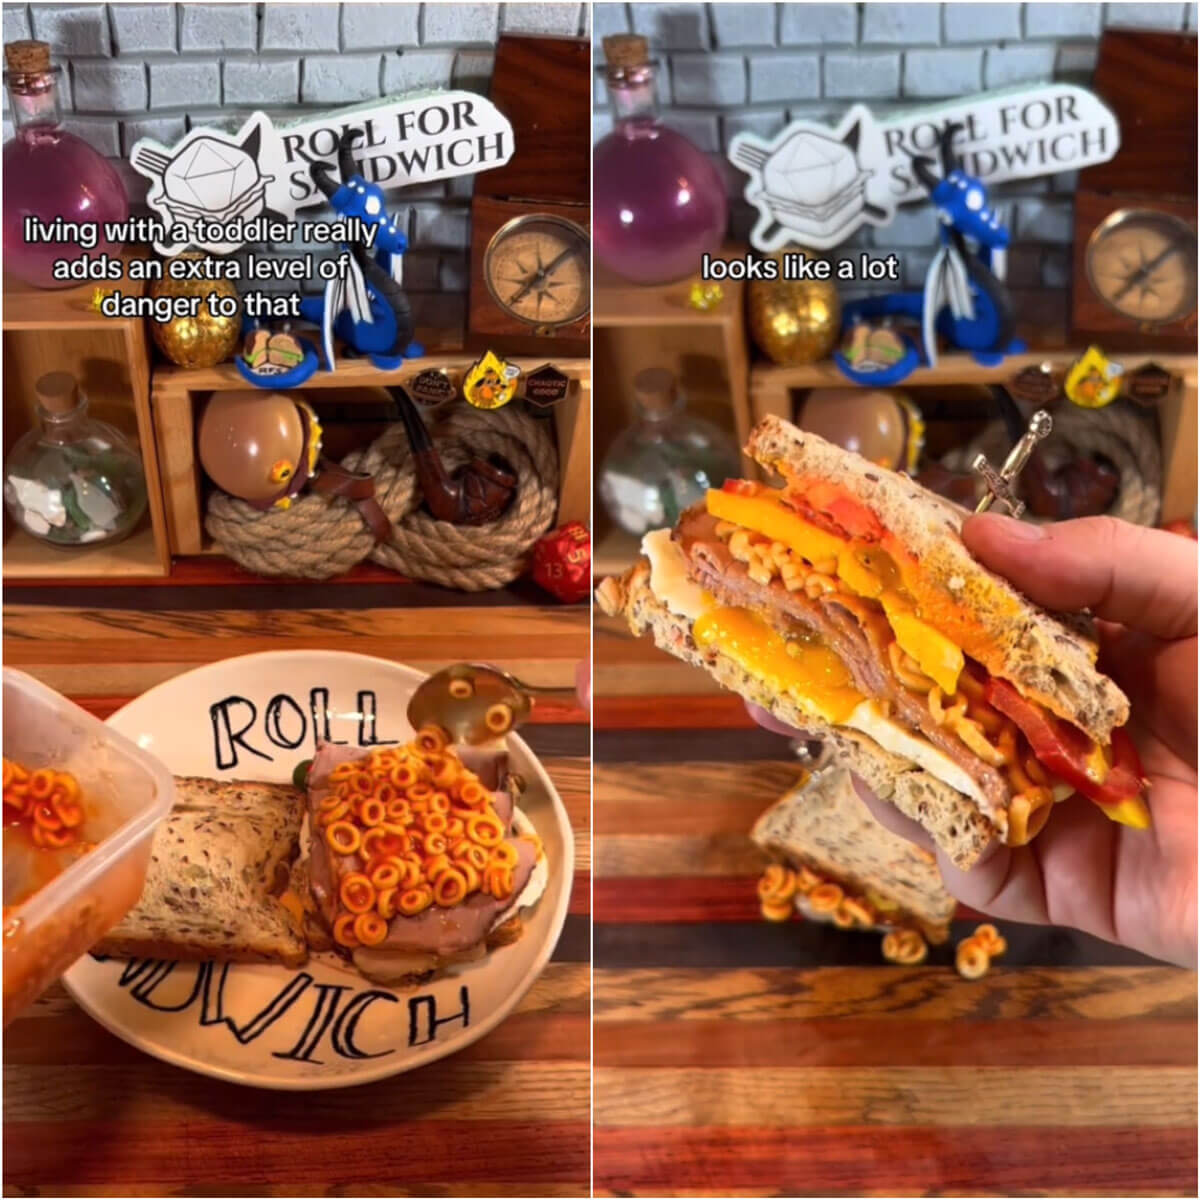 Geeking Out Over Sandwiches: The Best & Worst from TikTok’s Roll for Sandwich Series | Plated Asia Article